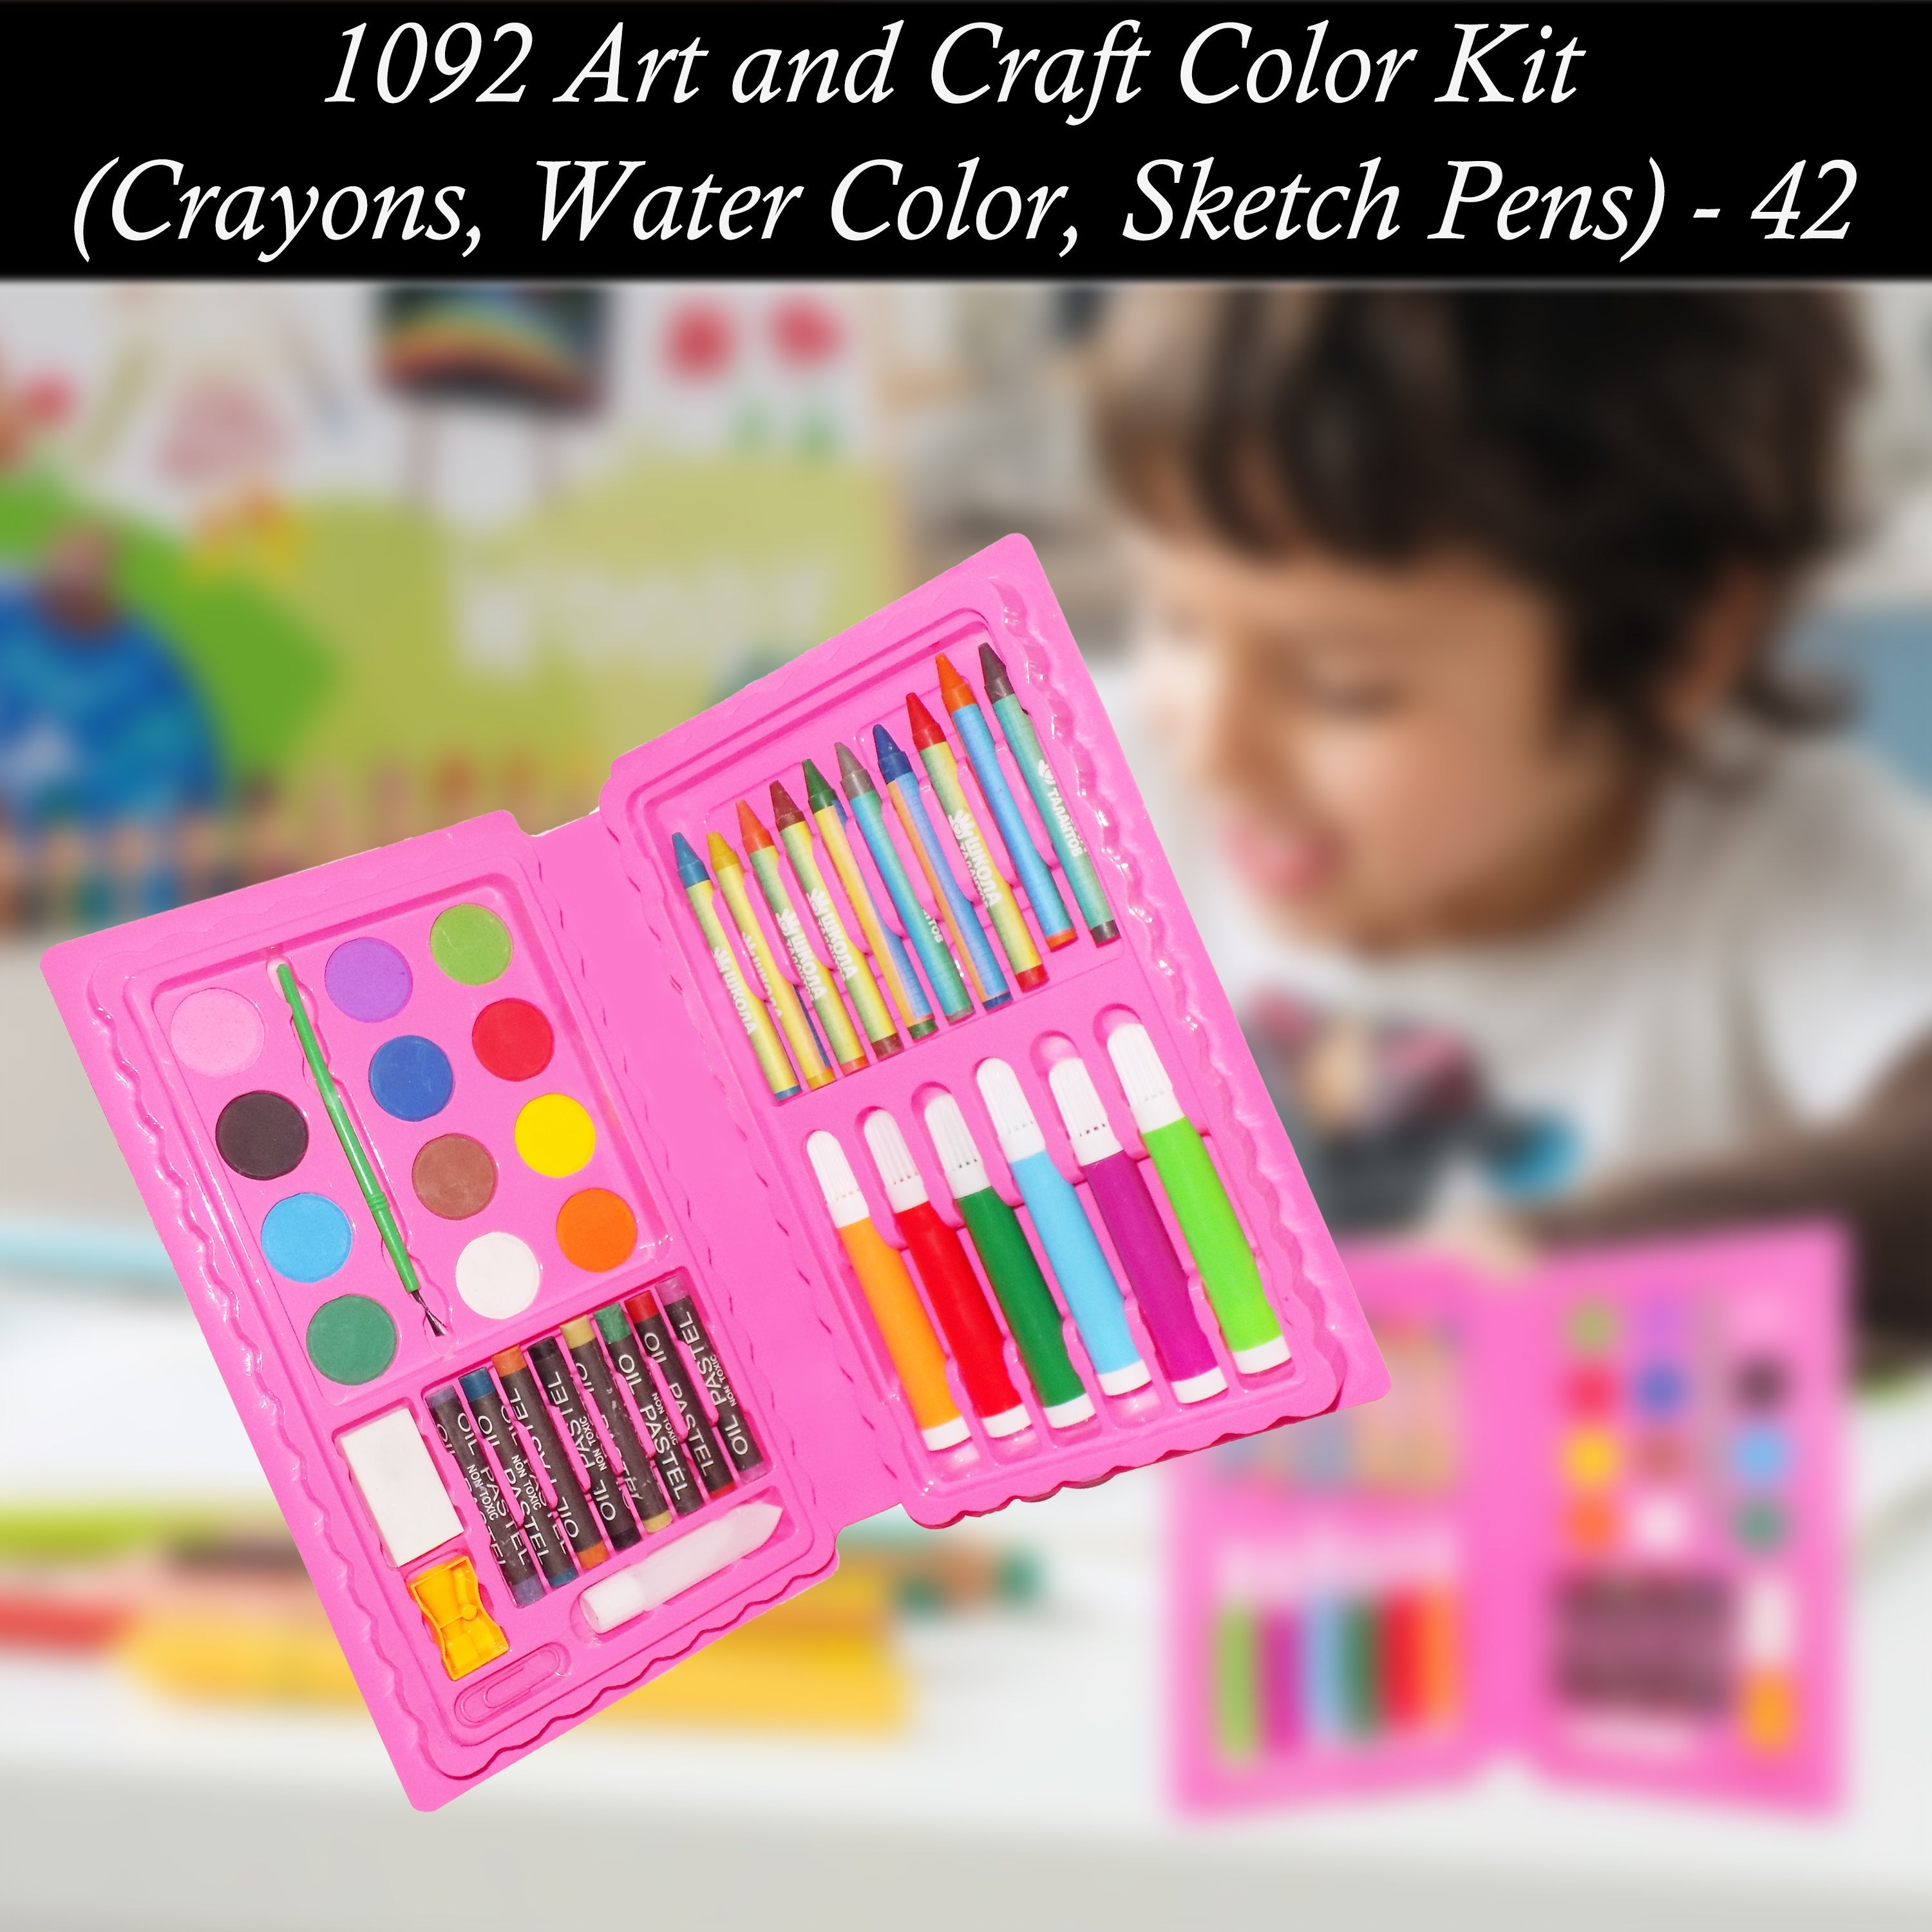 Art and Craft Color Kit (Crayons, Water Color, Sketch Pens) - 42 Pcs